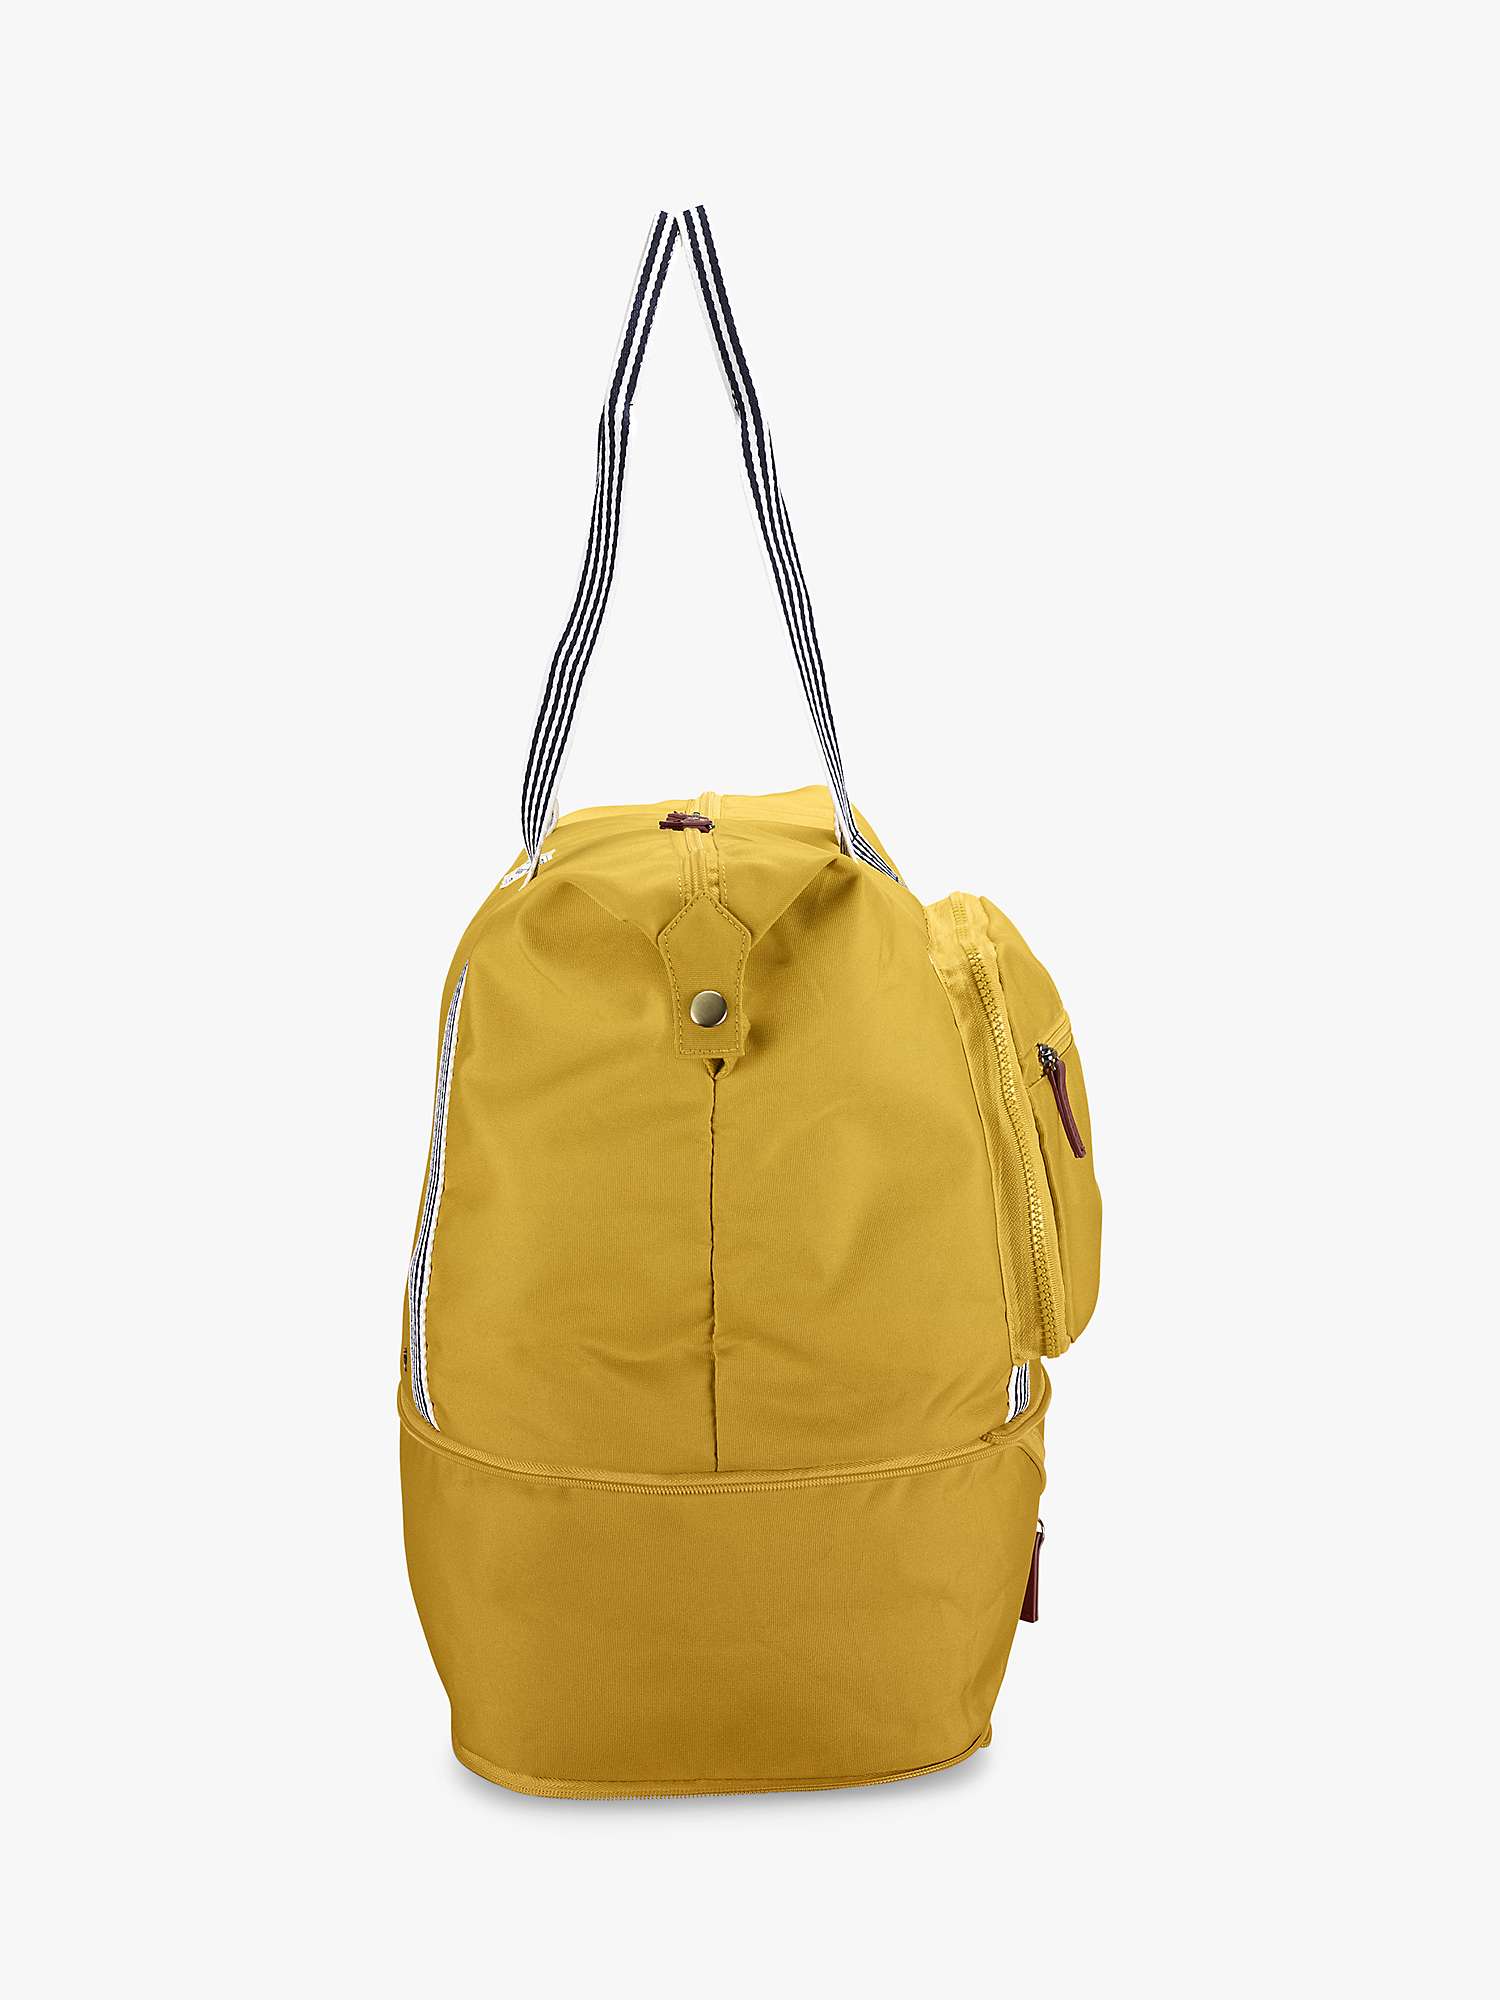 Buy Joules Coast Collection Packaway Duffle Bag Online at johnlewis.com